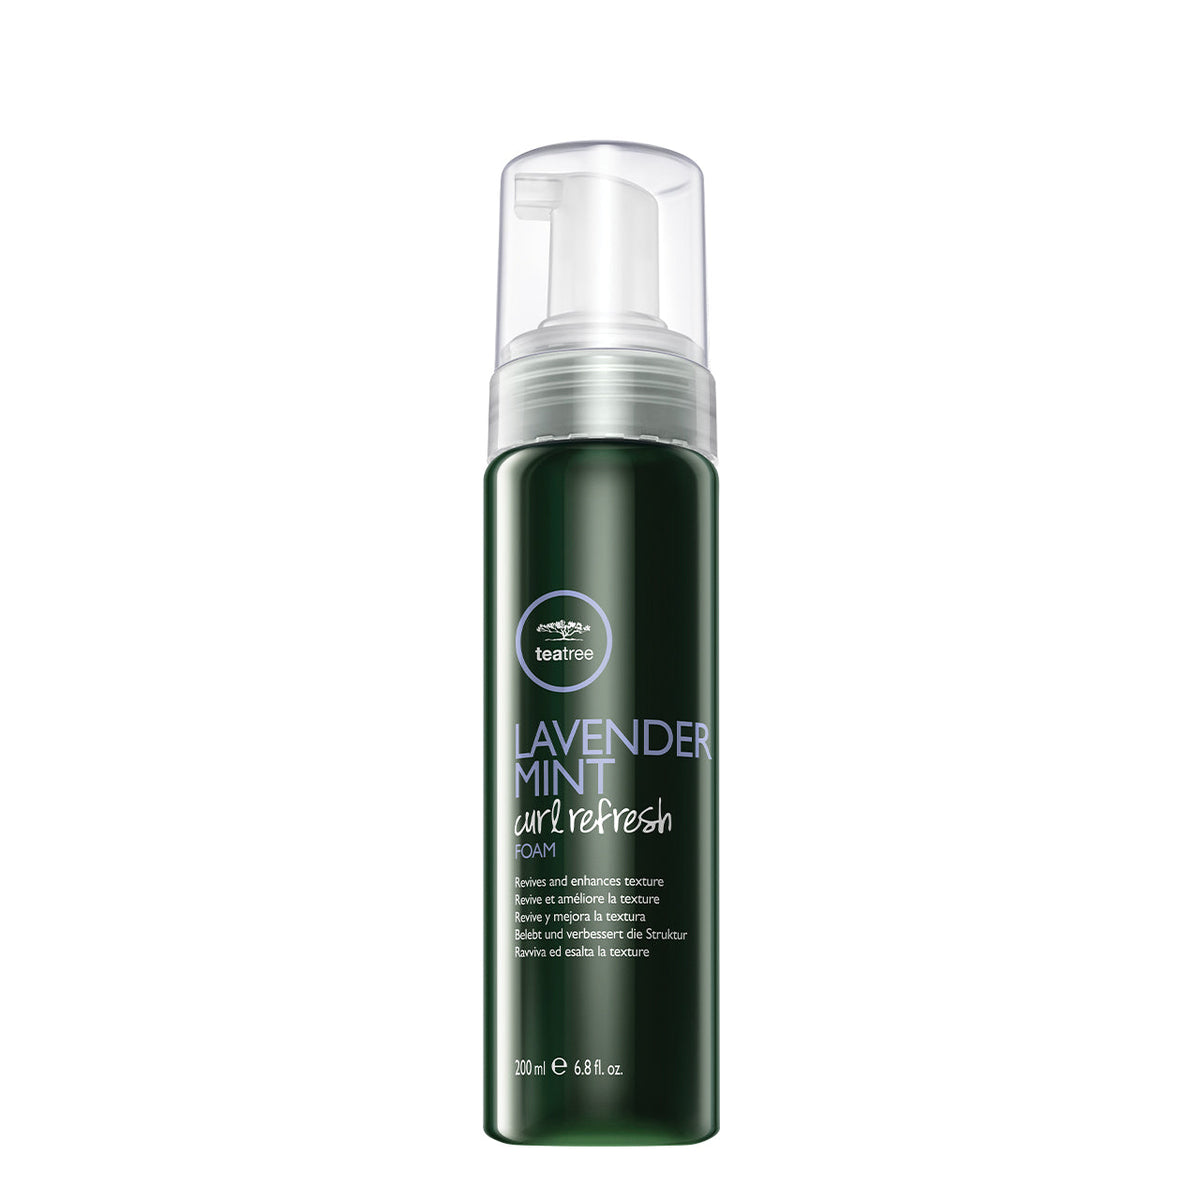 Tea Tree Lavender Mint Curl Refresh Foam - 200ML - by Paul Mitchell |ProCare Outlet|